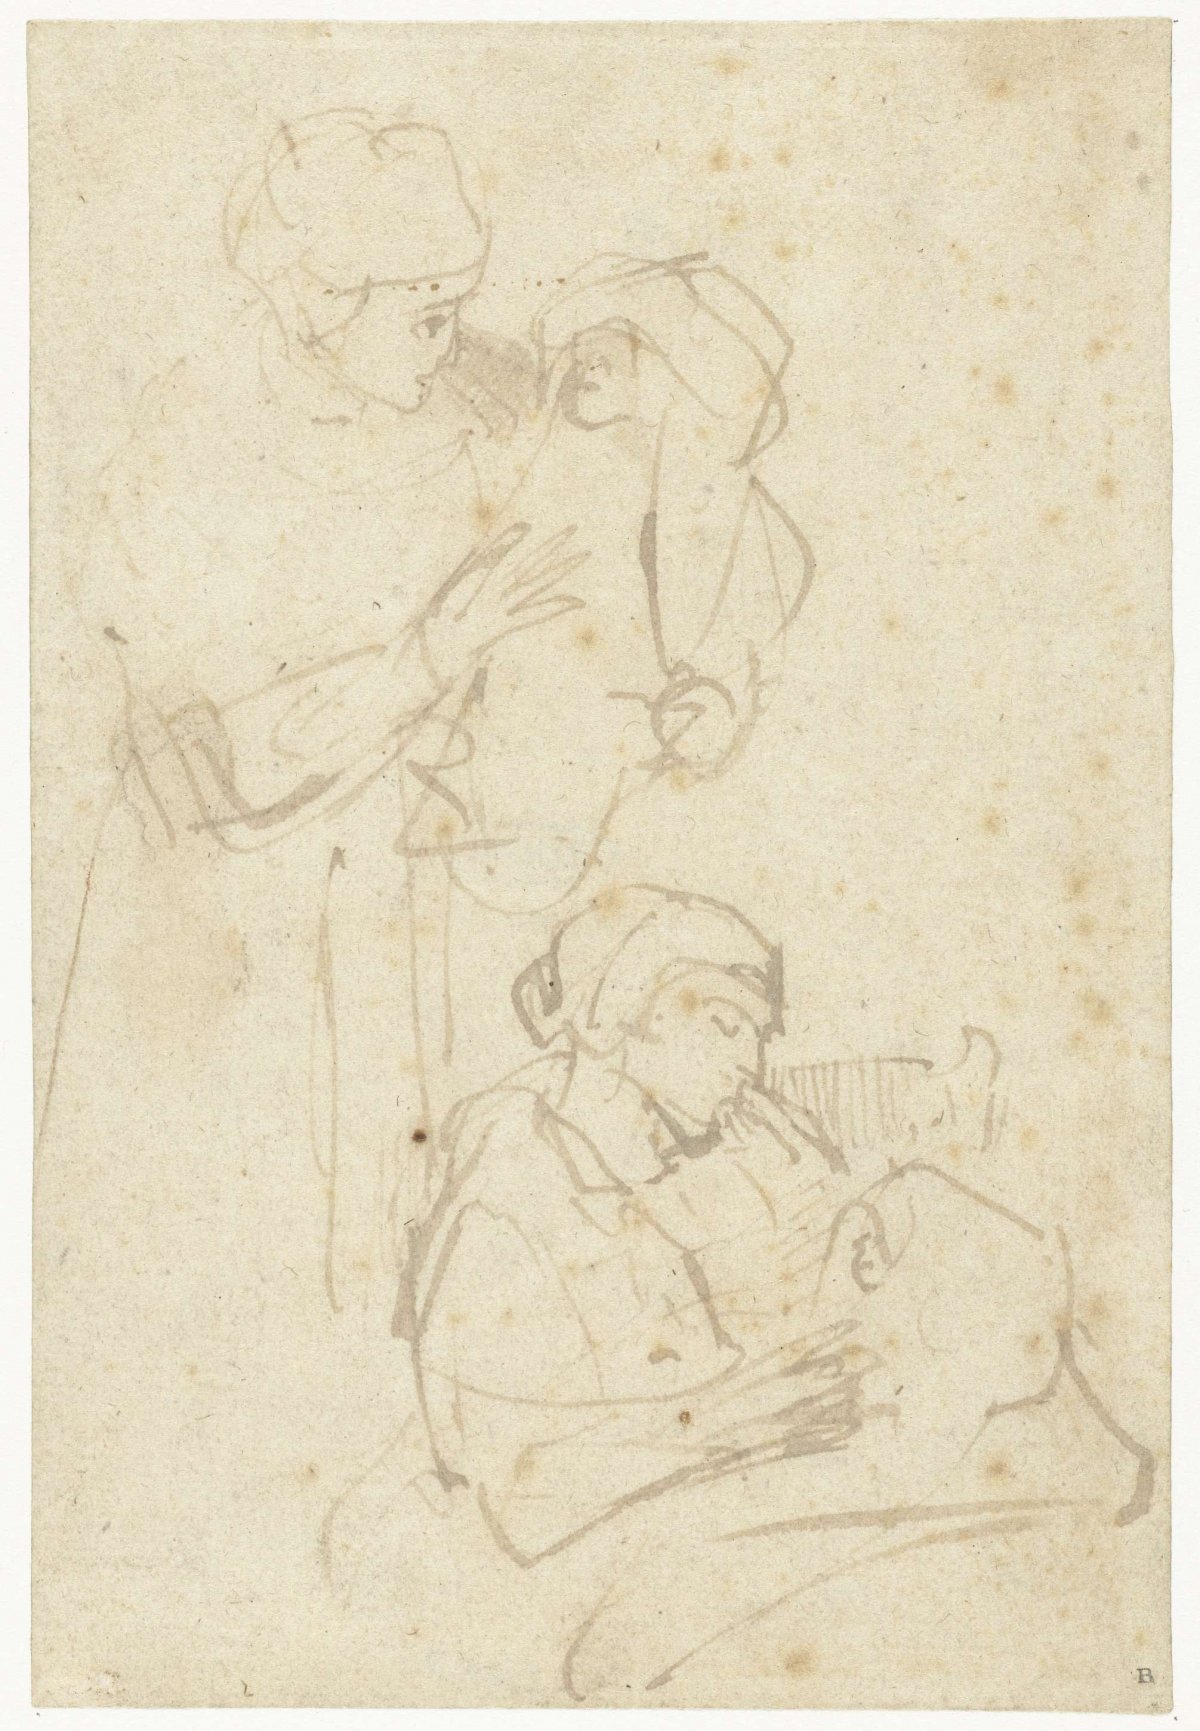 Two Studies of a Woman and Child, Rembrandt van Rijn, after c. 1650